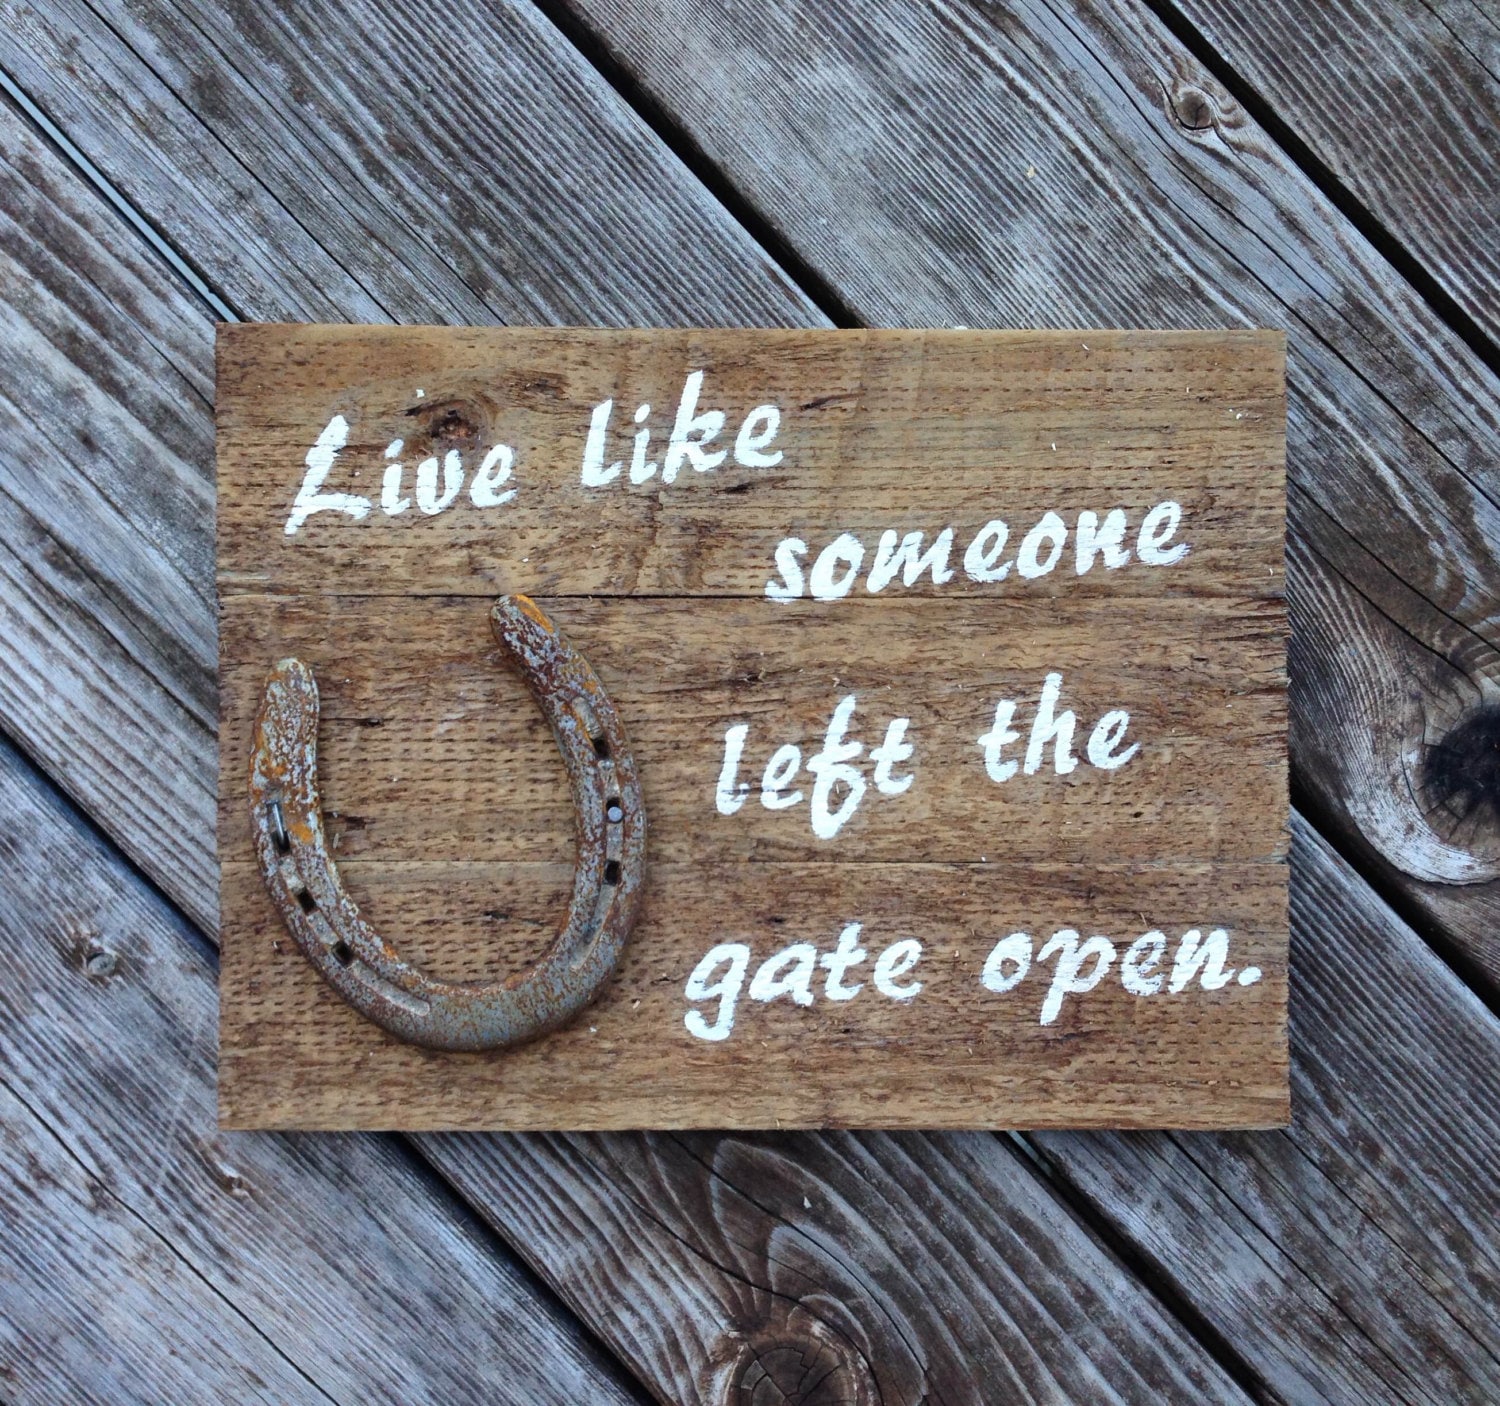 Live like someone left the gate open farm pig canvas - NanoTees : High Quality T-shirt Online